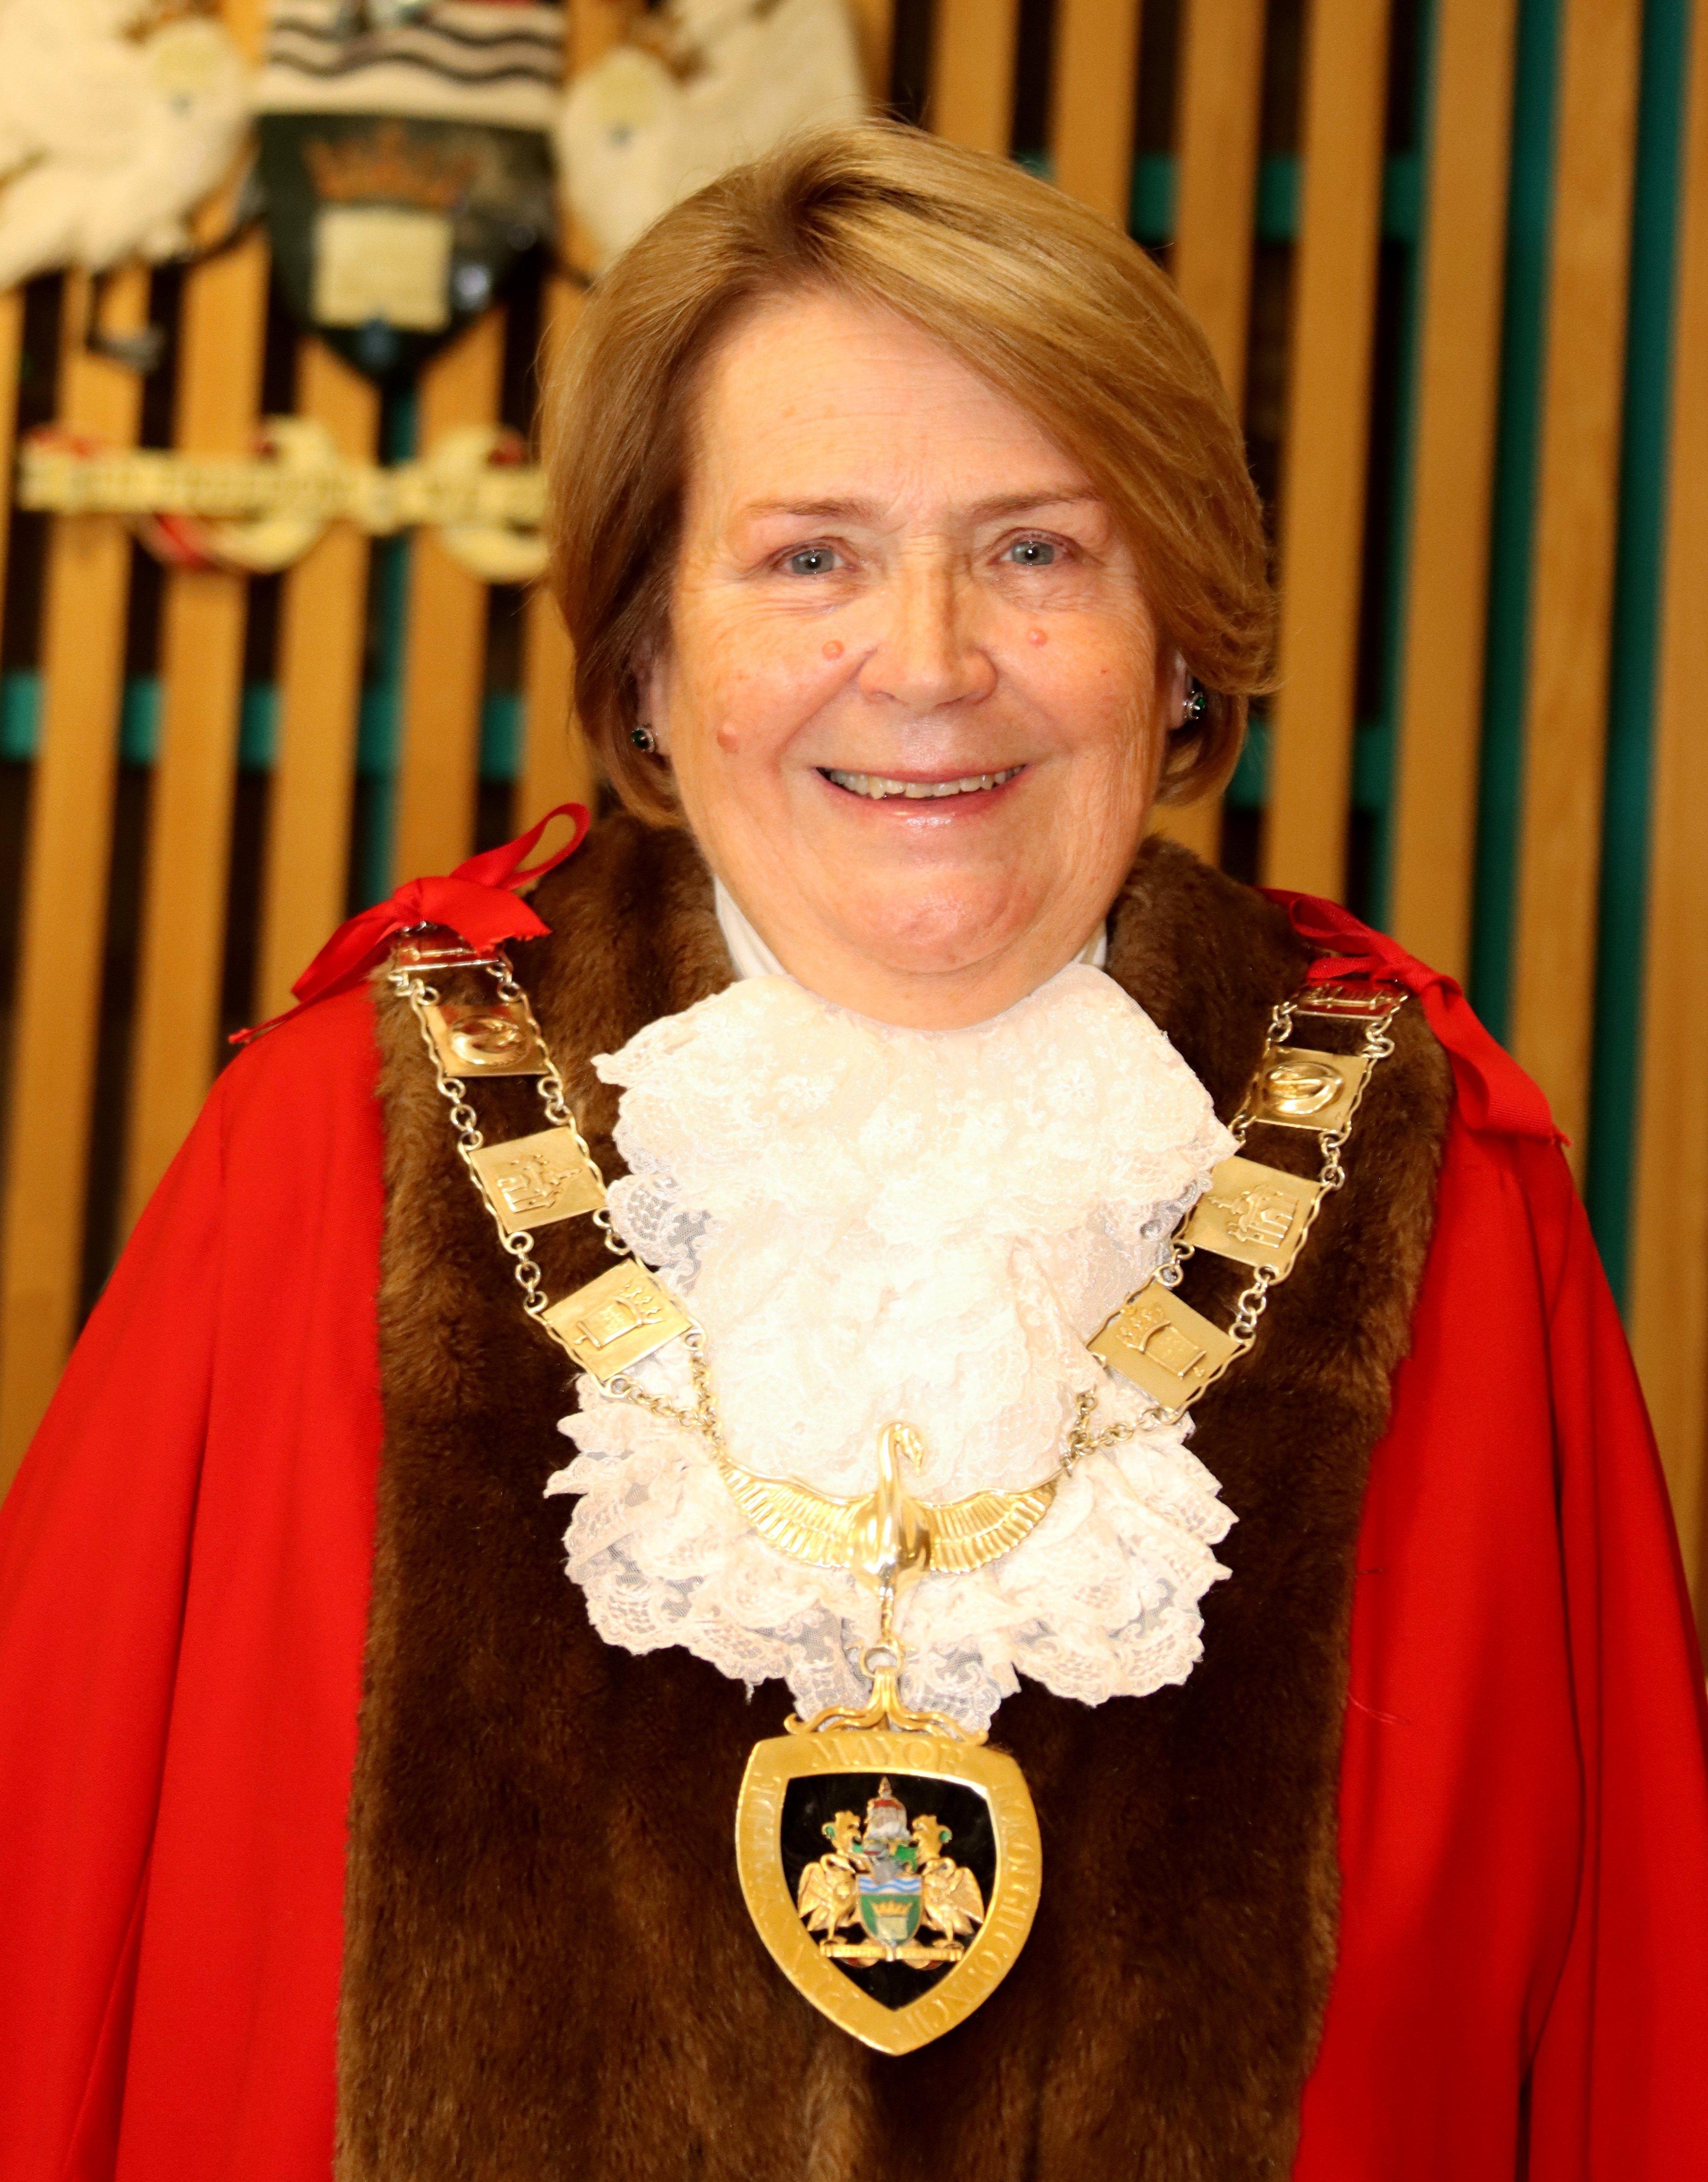 A lady wearing robes for a Mayor